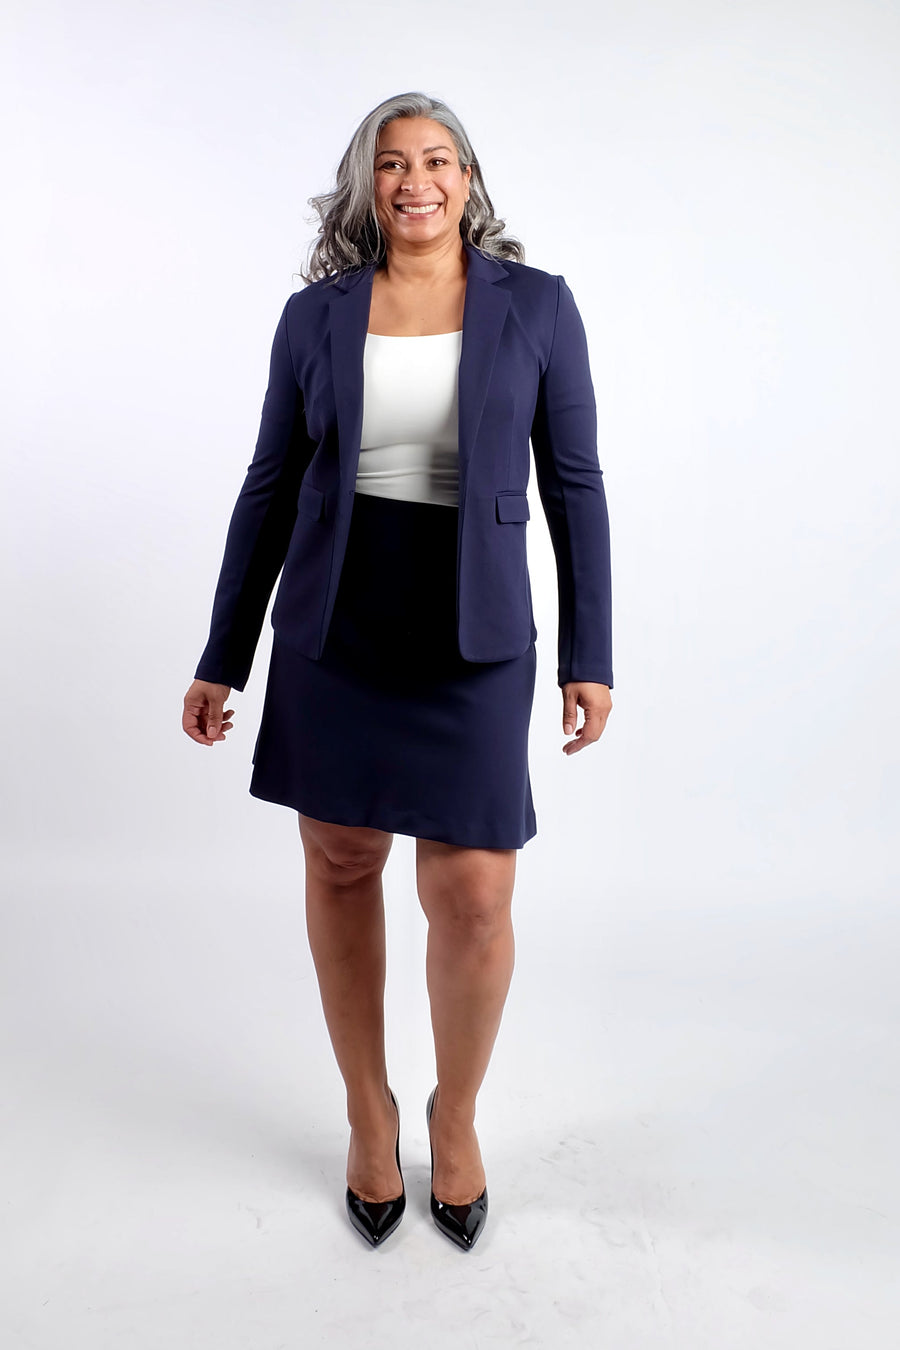 woman wearing navy blue work outfit